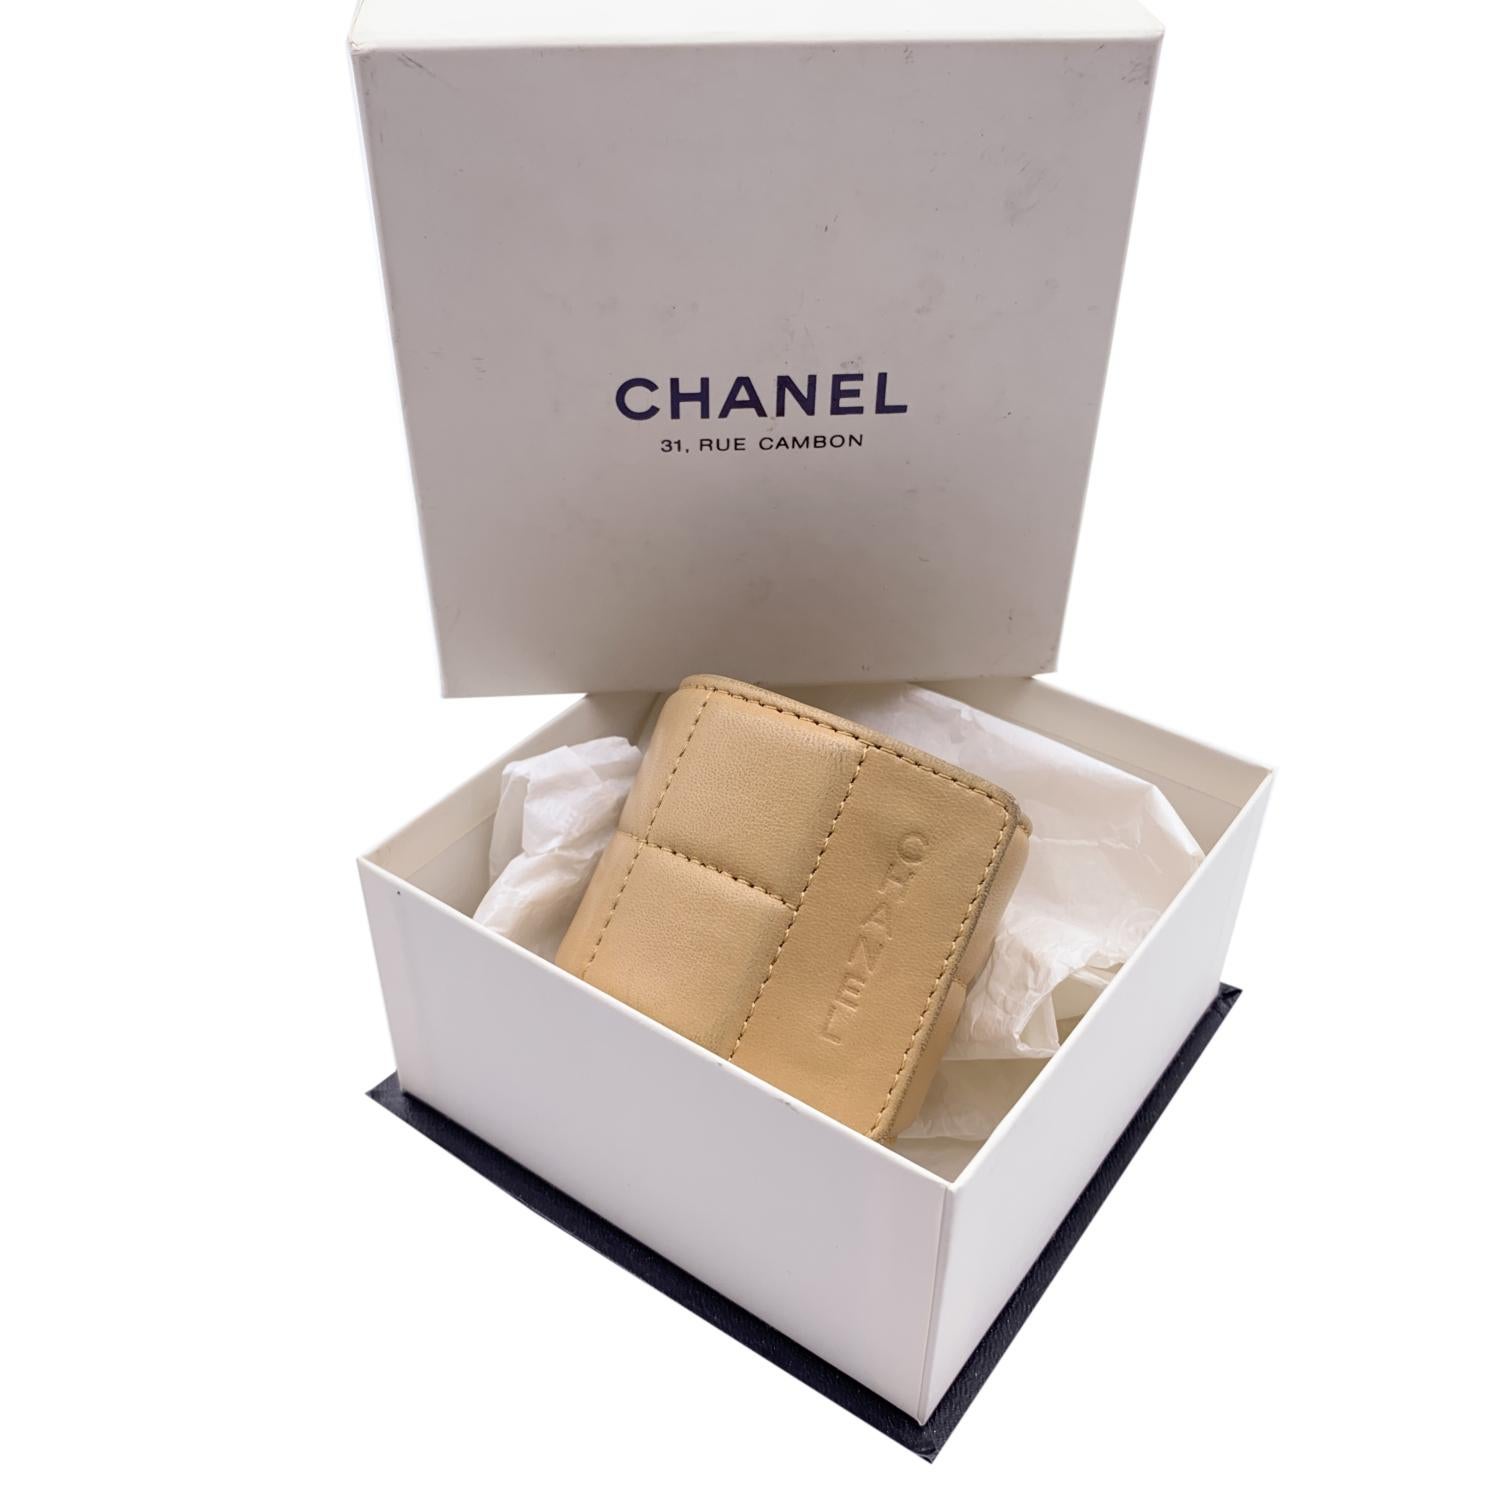 Vintage Beige leather wide bracelet from CHANEL. Square quilted leather. CHANEL signature engraved on leather. Button closure. 'CHANEL 00 CC A - Made in France' . Max lenght: 6 inches - 16.5 cm. Width: 2.25 inches - 5.6 cm

Condition

B - VERY